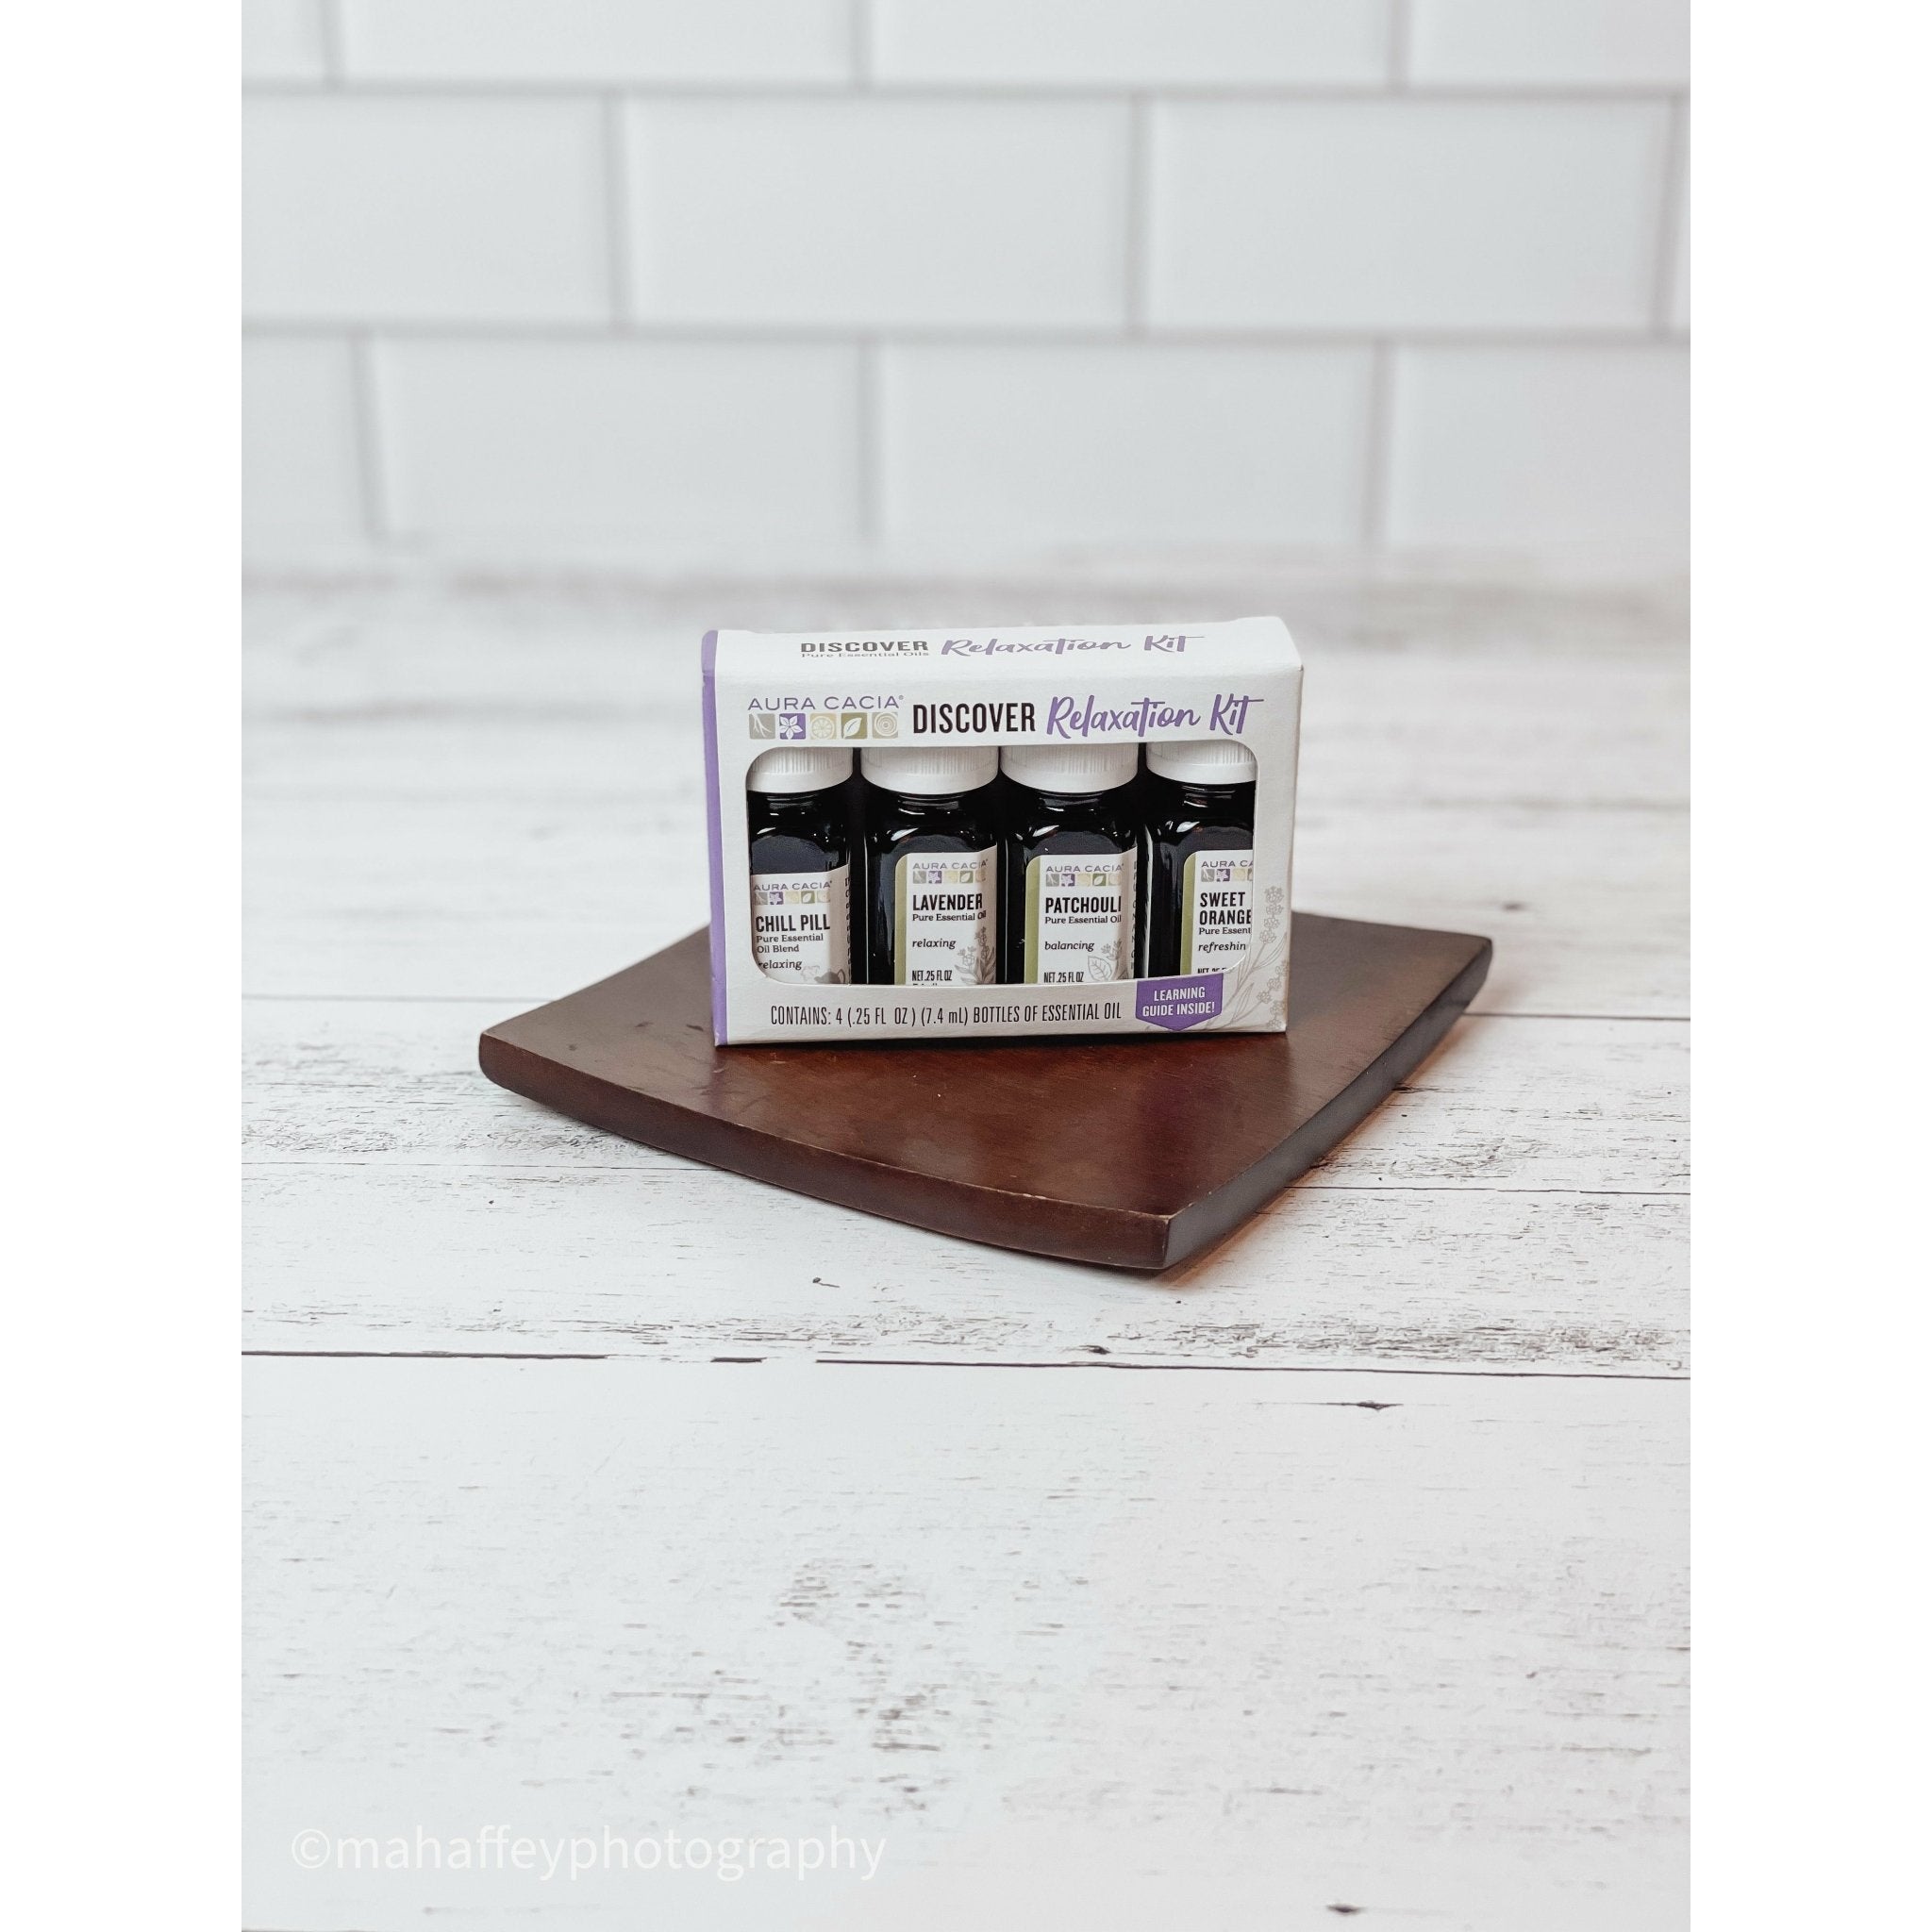 Aromatherapy Diffusion Gift Set | Pure Essential Oils - Celtic Clan Soapery LLC